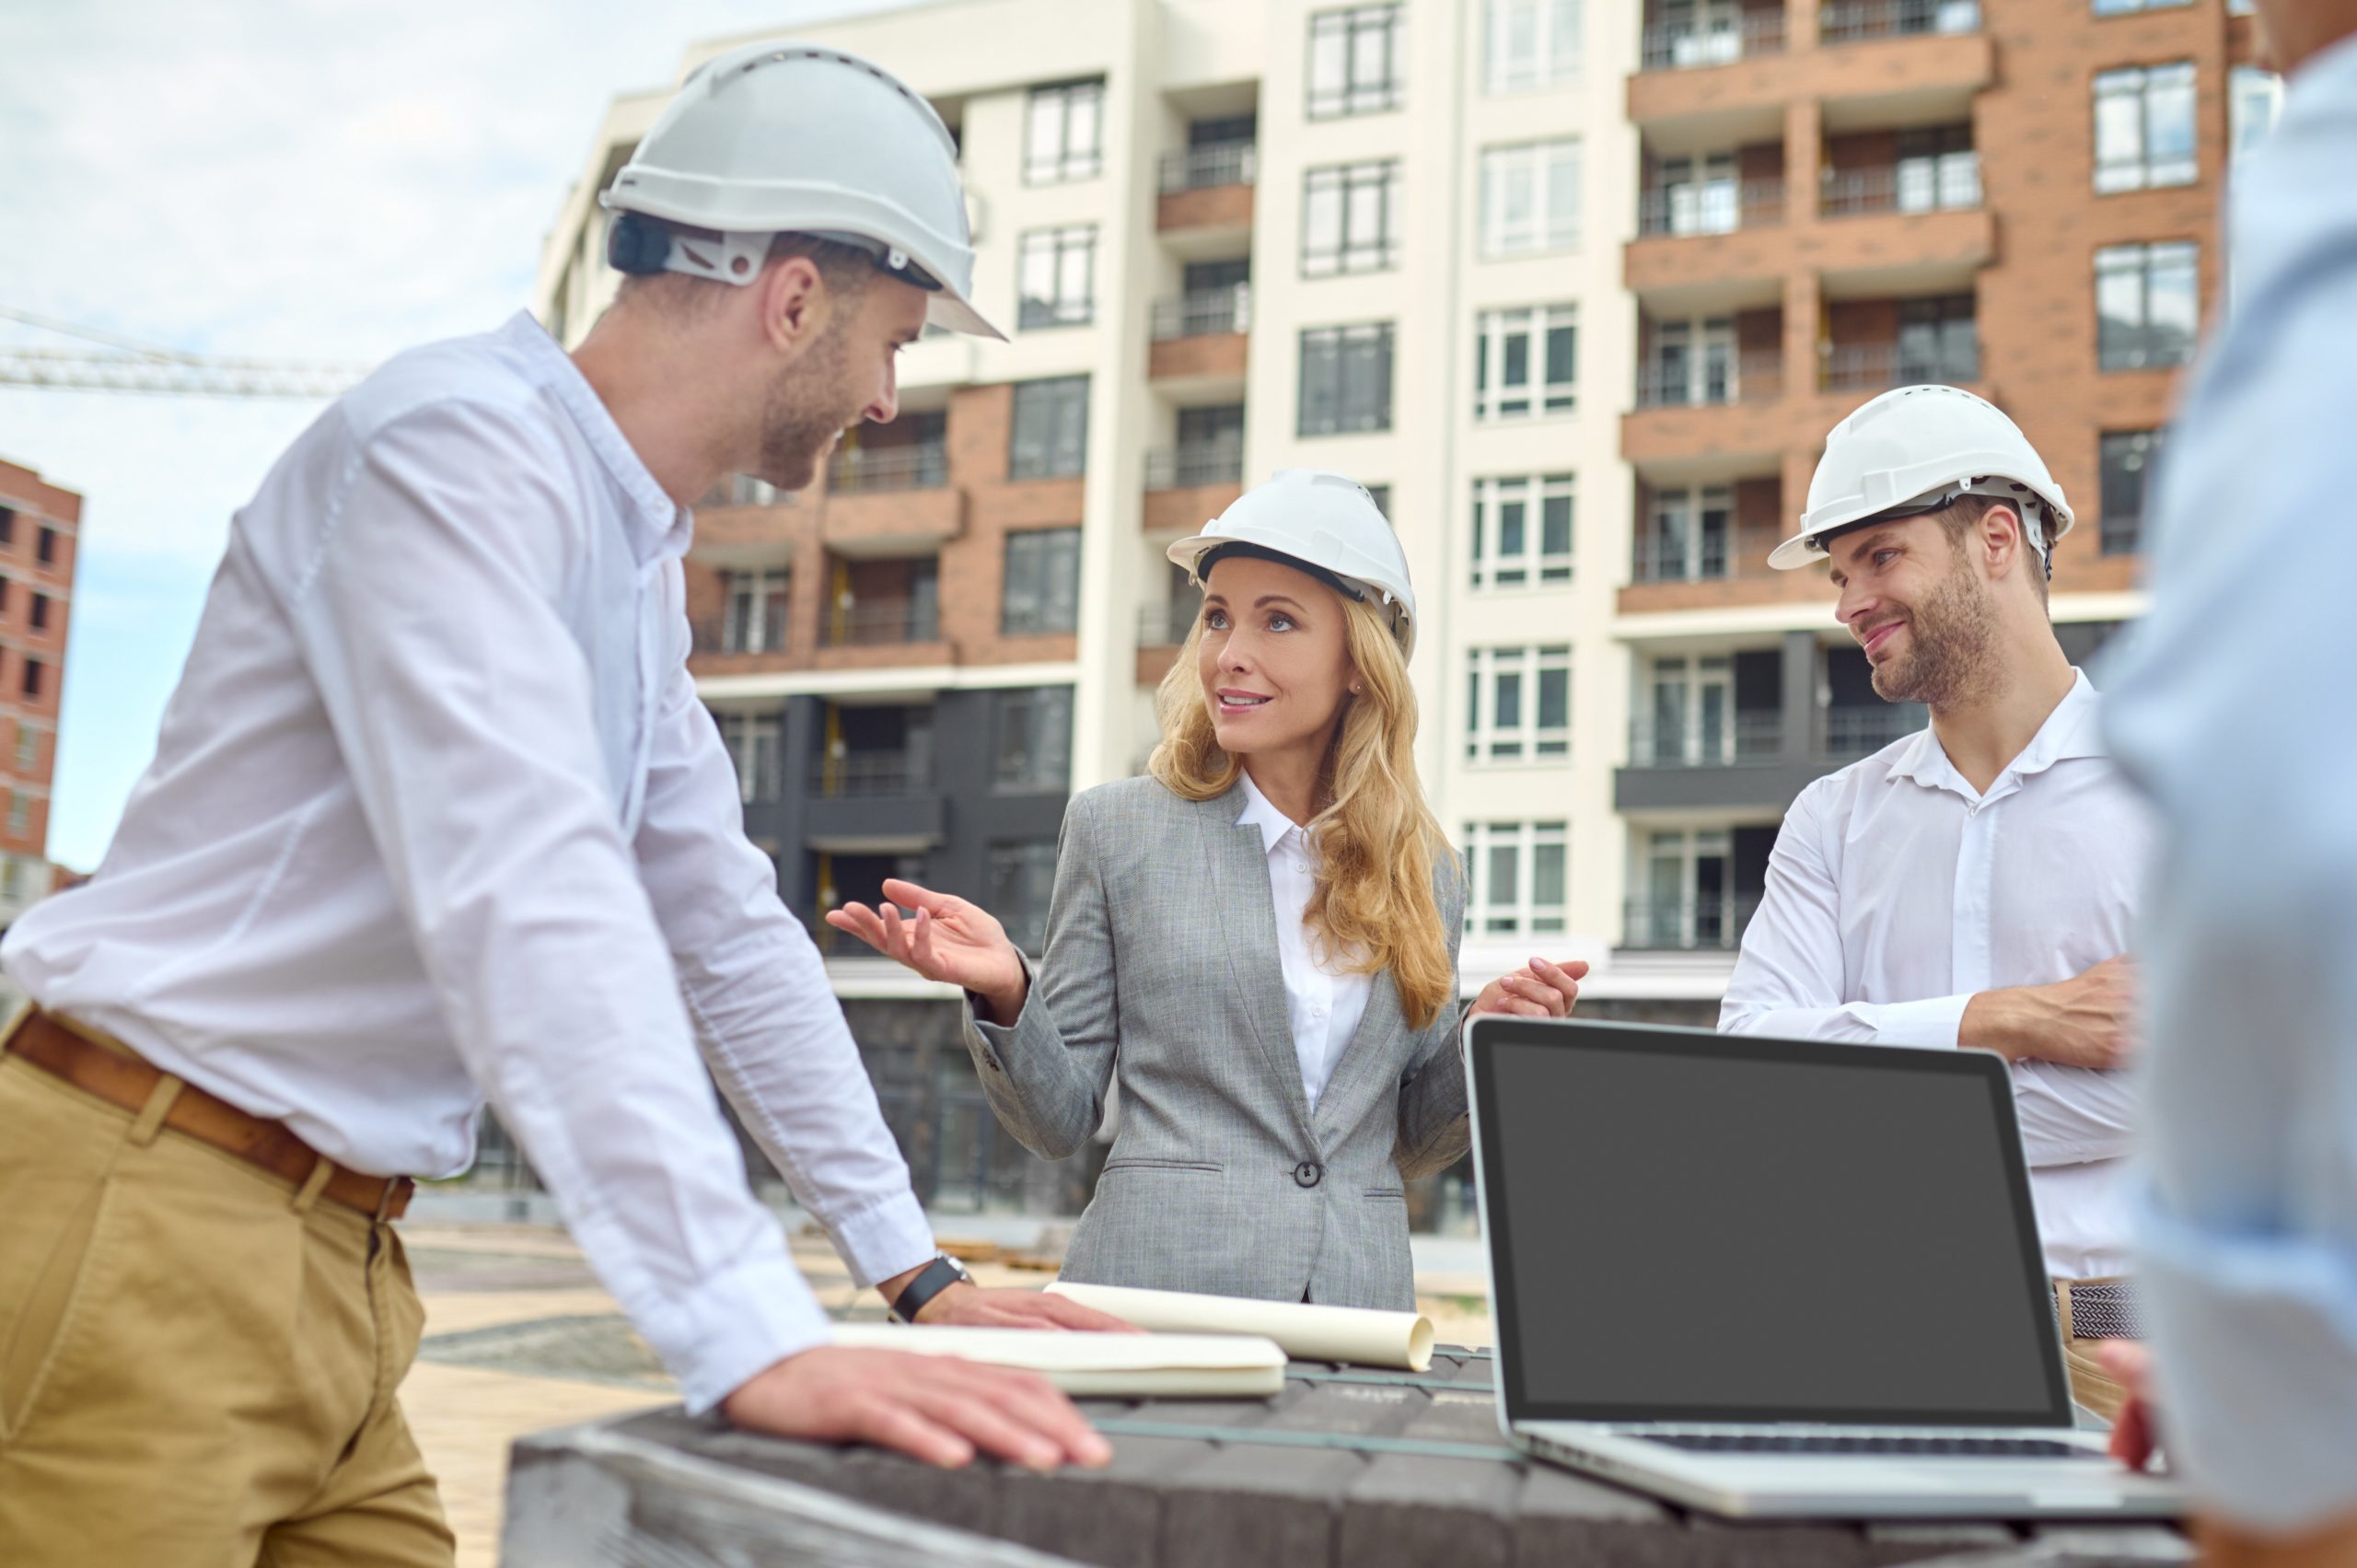 Transforming the Construction Industry Through Digitalization